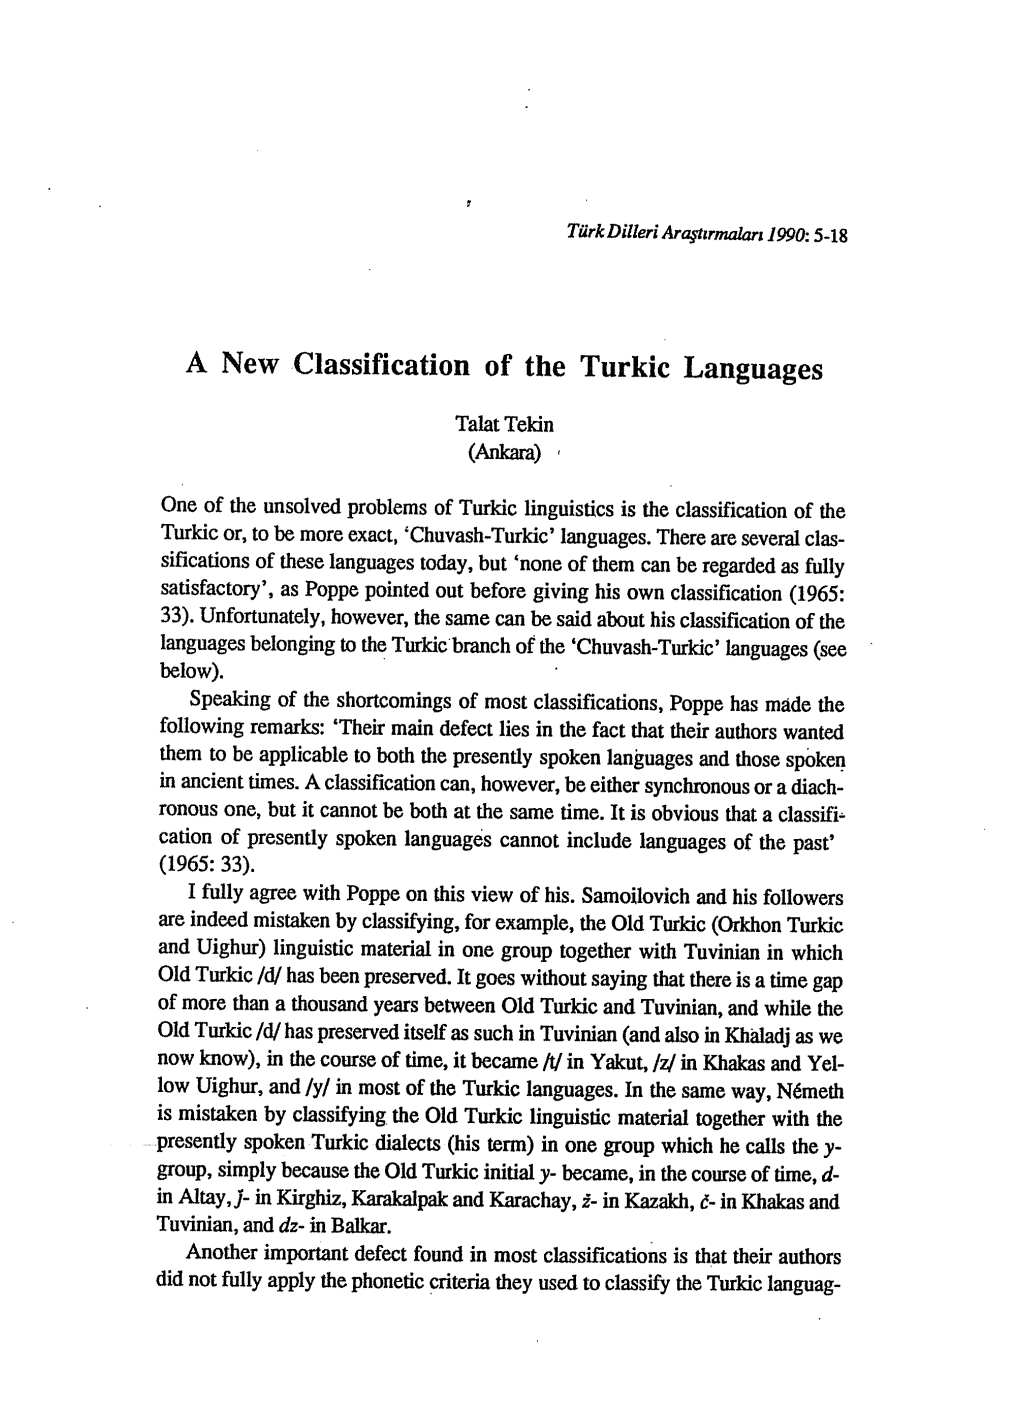 A Newclassification of the Turkic Languages